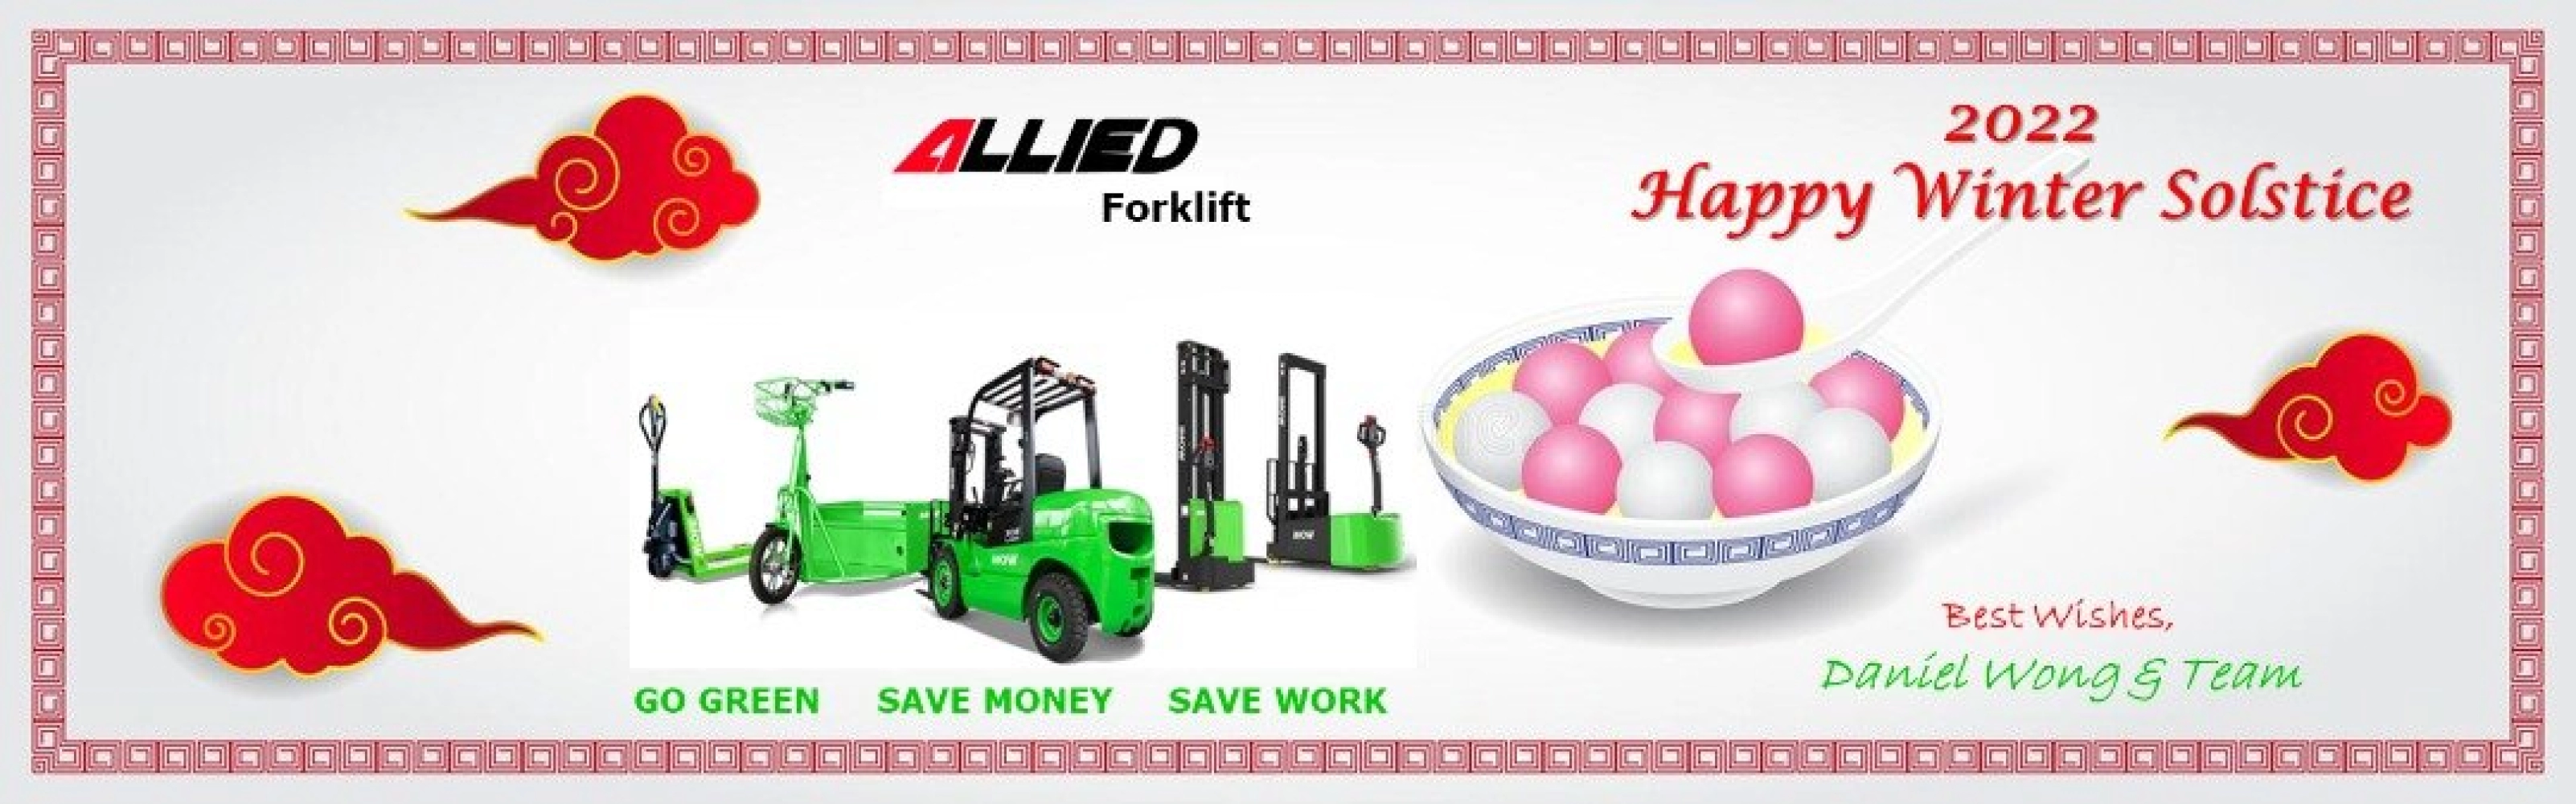 Happy Winter Solstice - Greeting from Allied Forklift